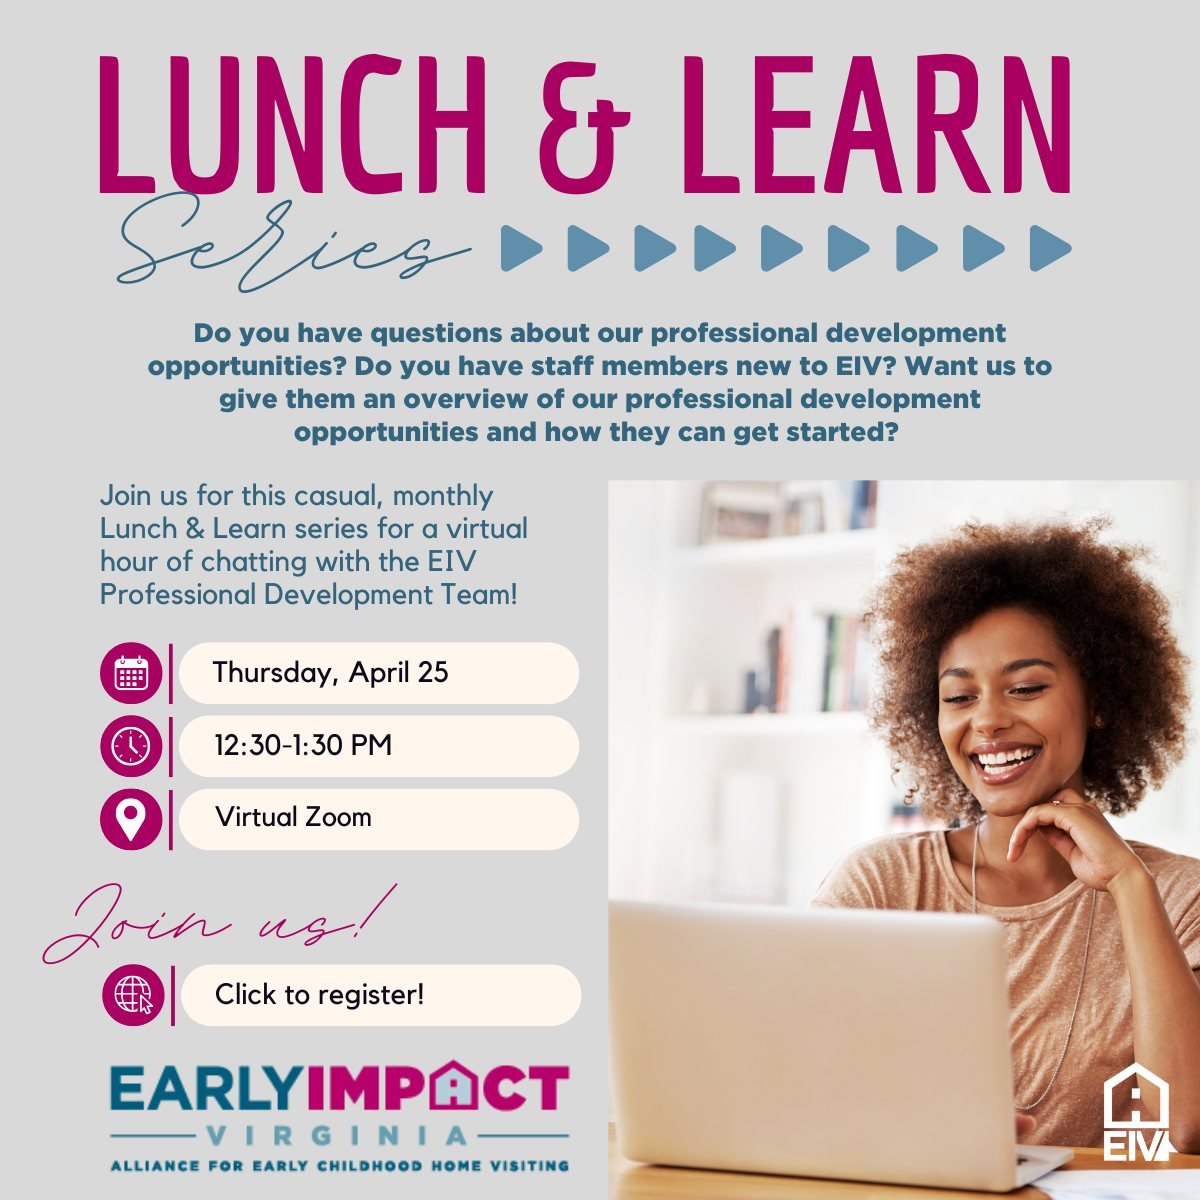 April Lunch &amp; Learn THIS THURSDAY!

Do you have questions about EIV's professional development opportunities? Join us for our virtual March Professional Development Lunch &amp; Learn to learn more about how you can get started with our profession